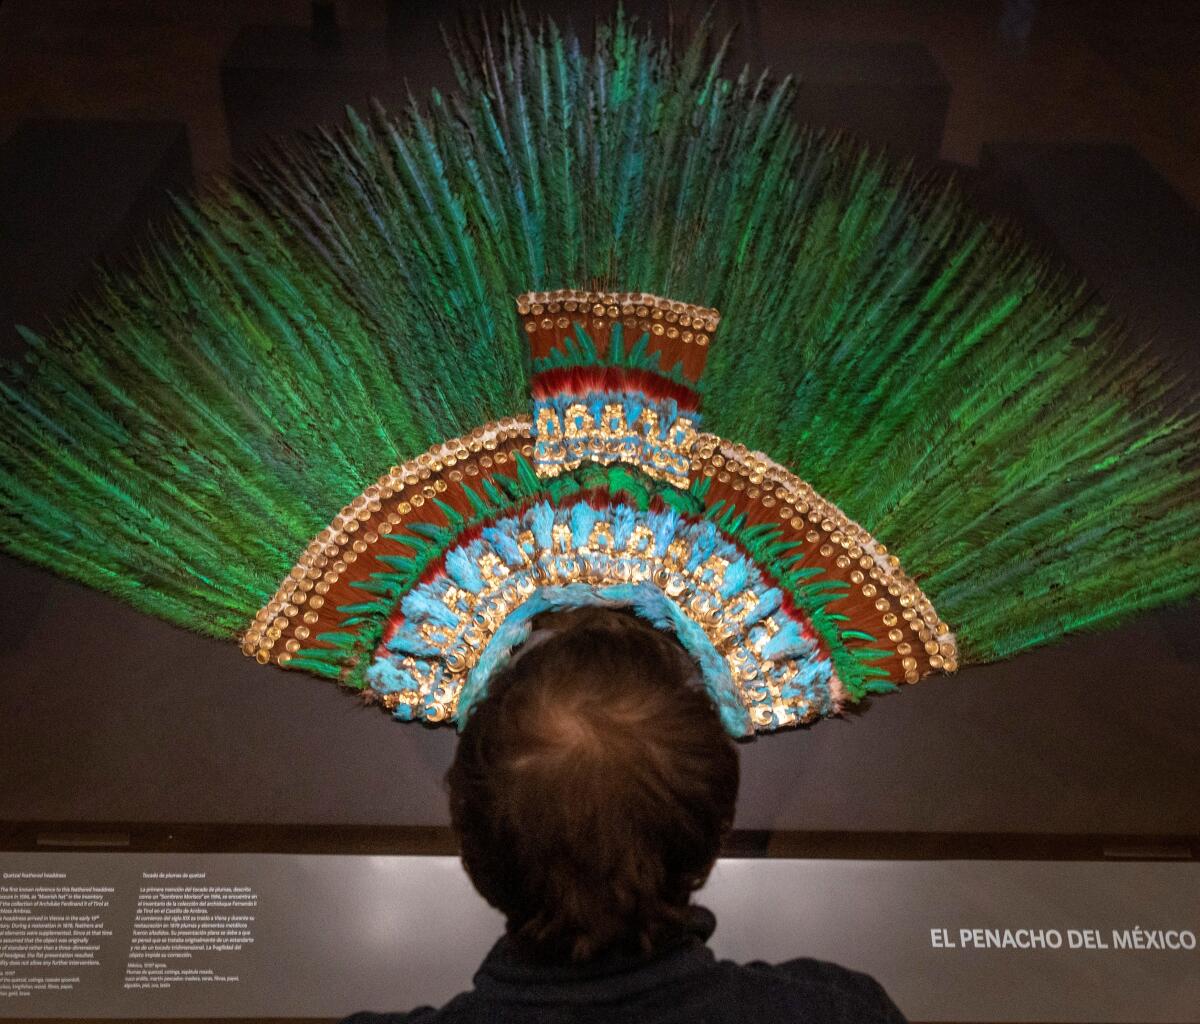 A man stands before the brilliantly colored feathered headdress that once reportedly belonged to Moctezuma